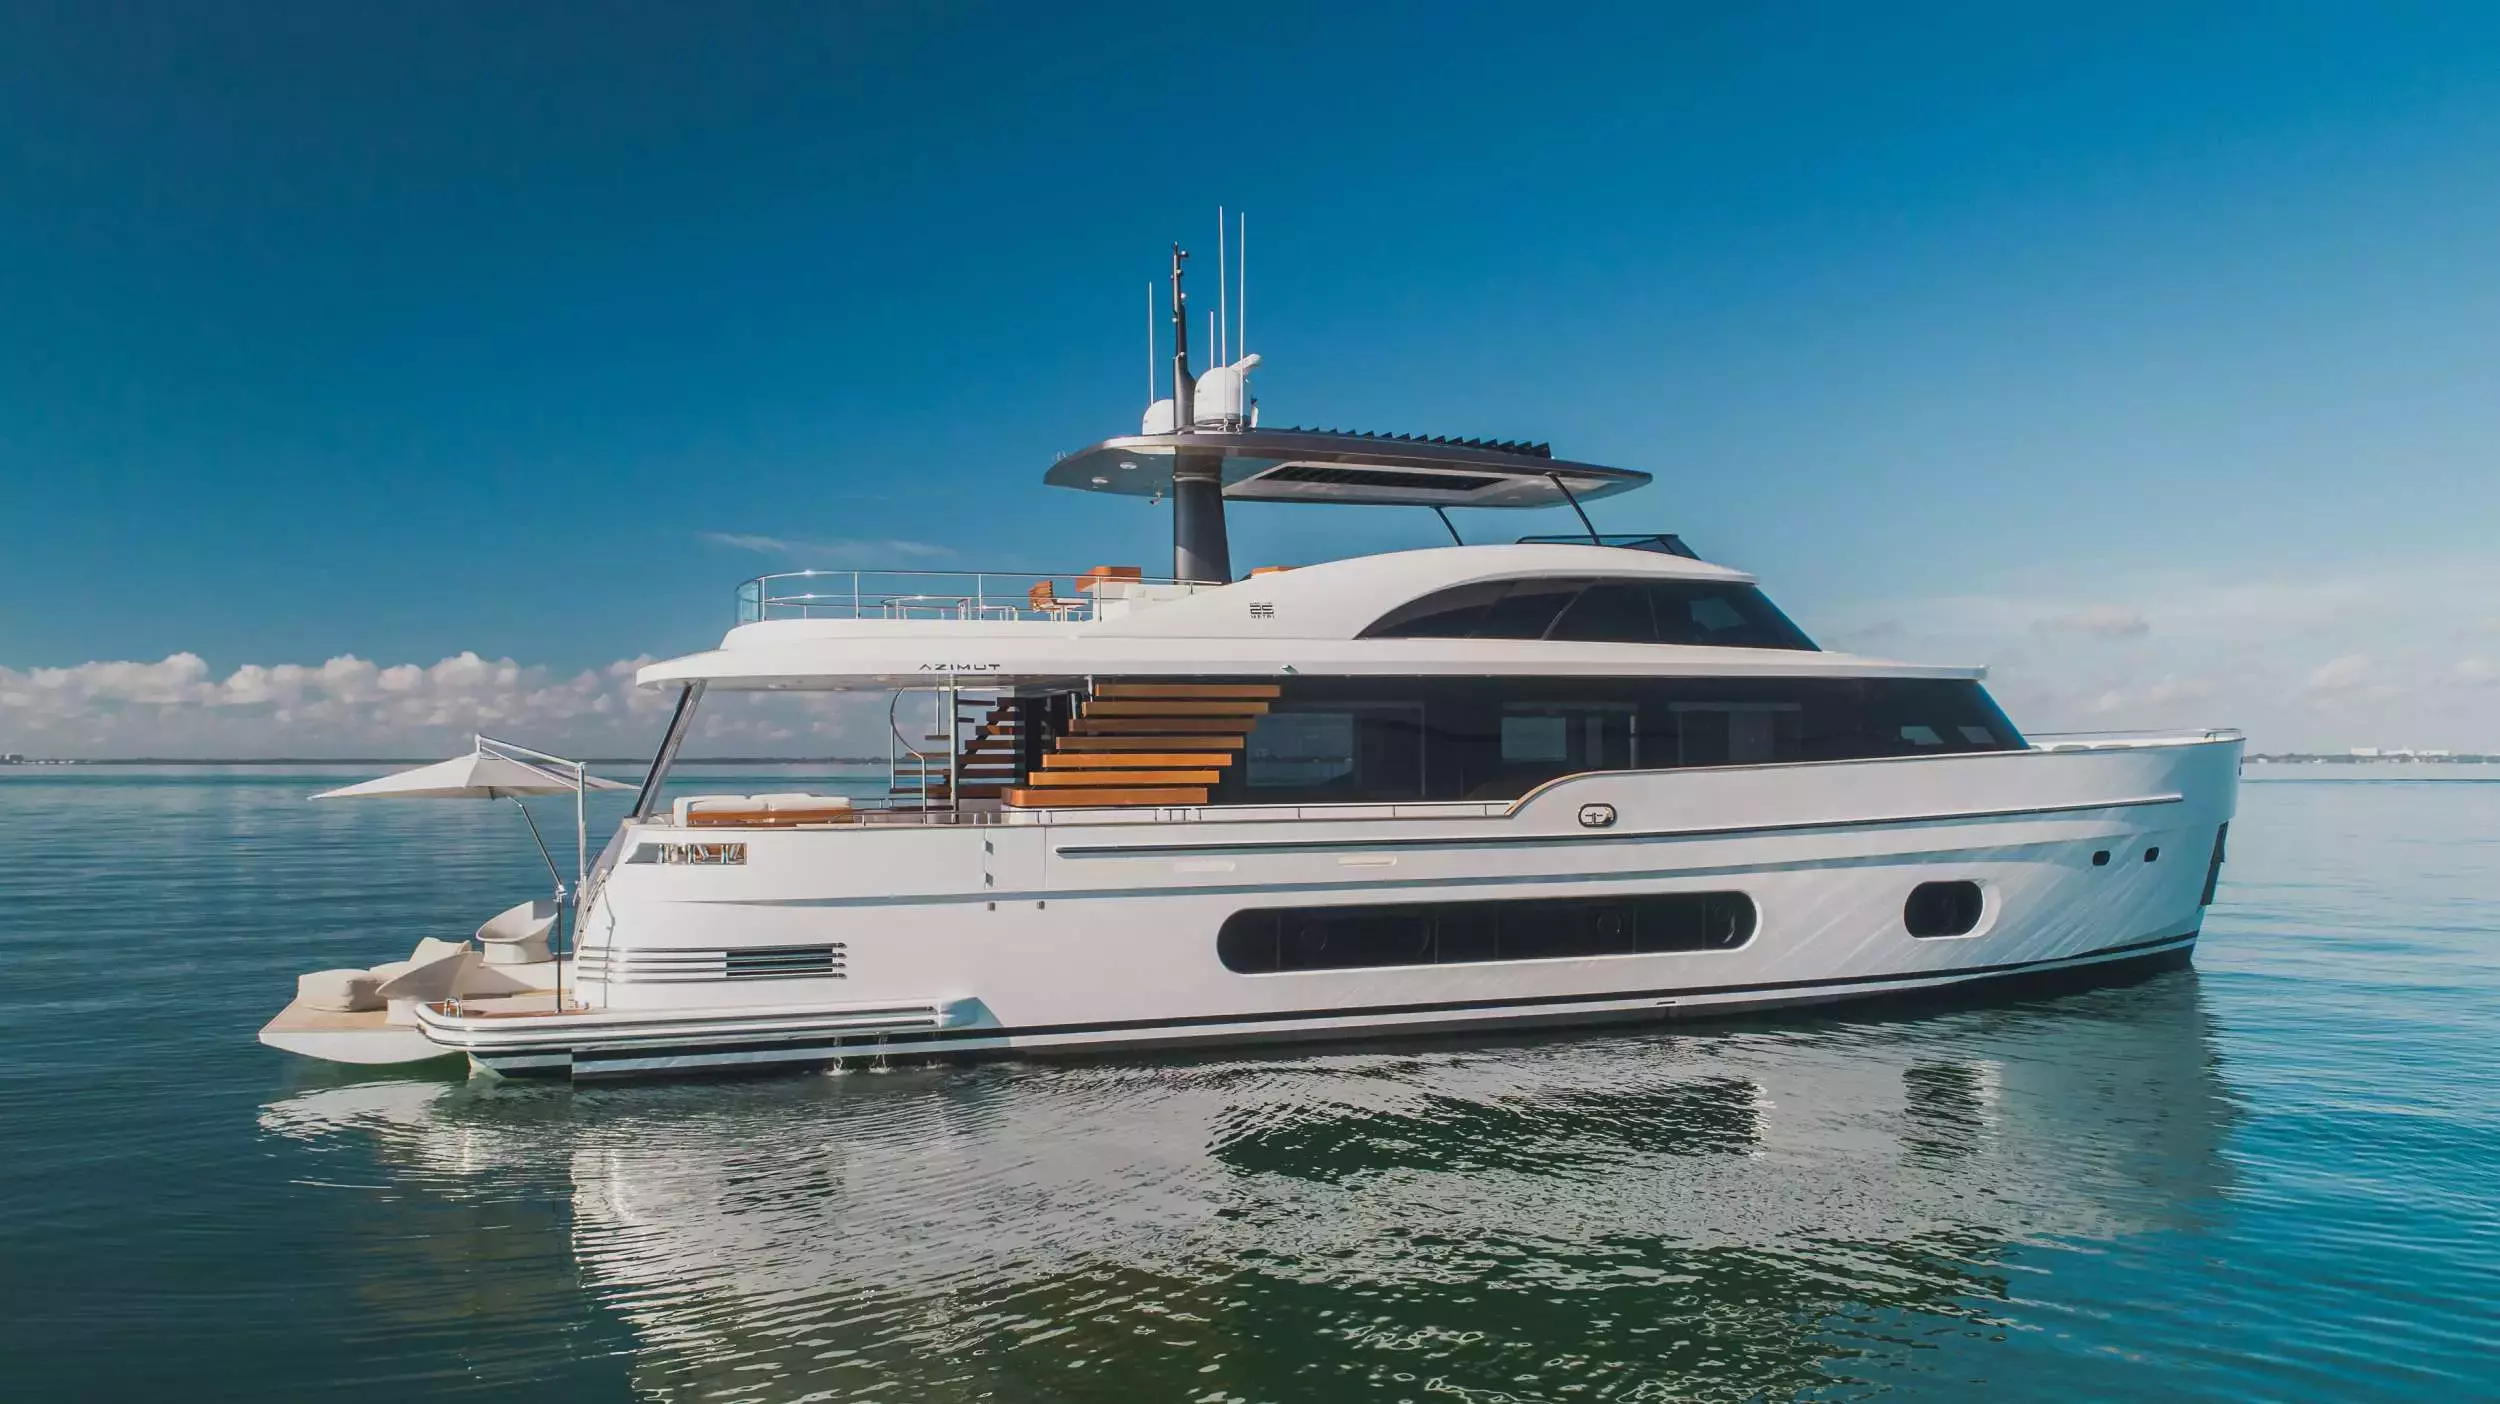 Guba Times by Azimut - Top rates for a Charter of a private Motor Yacht in Bahamas